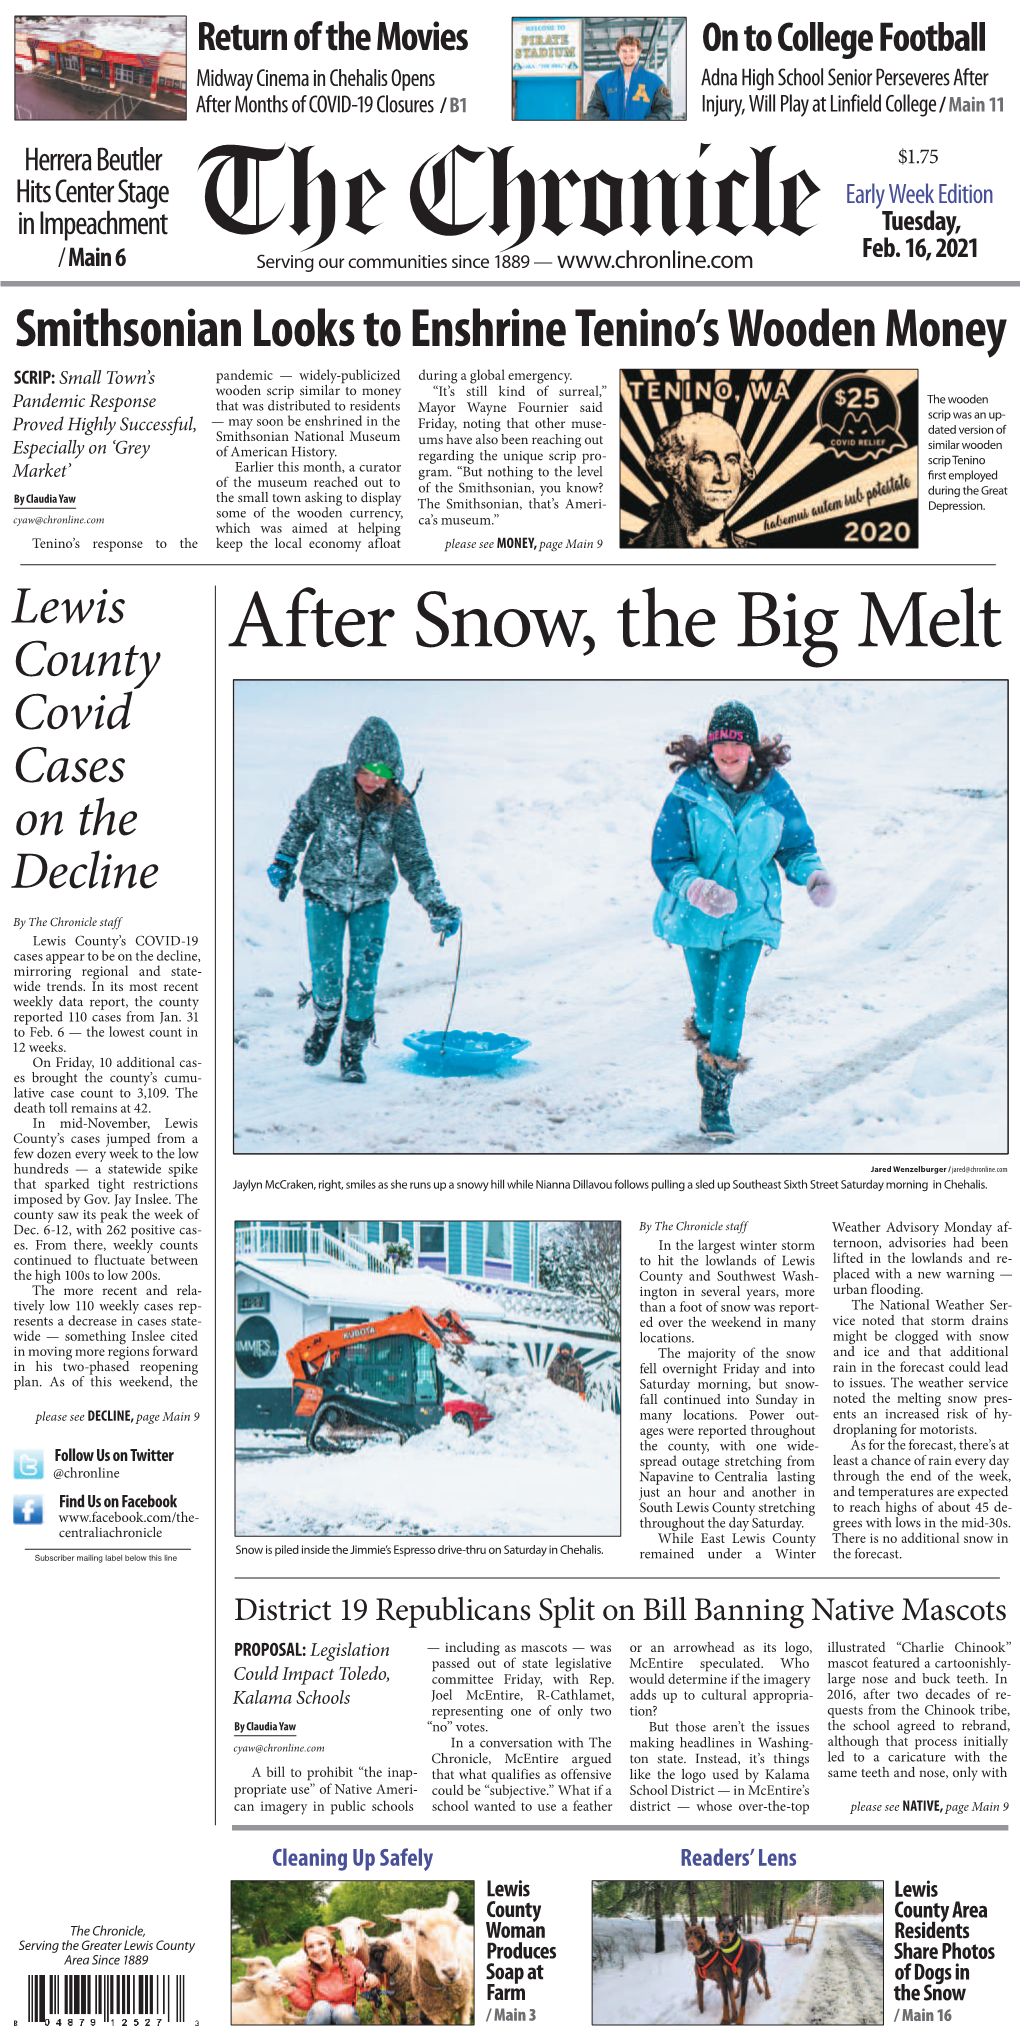 After Snow, the Big Melt Covid Cases on the Decline